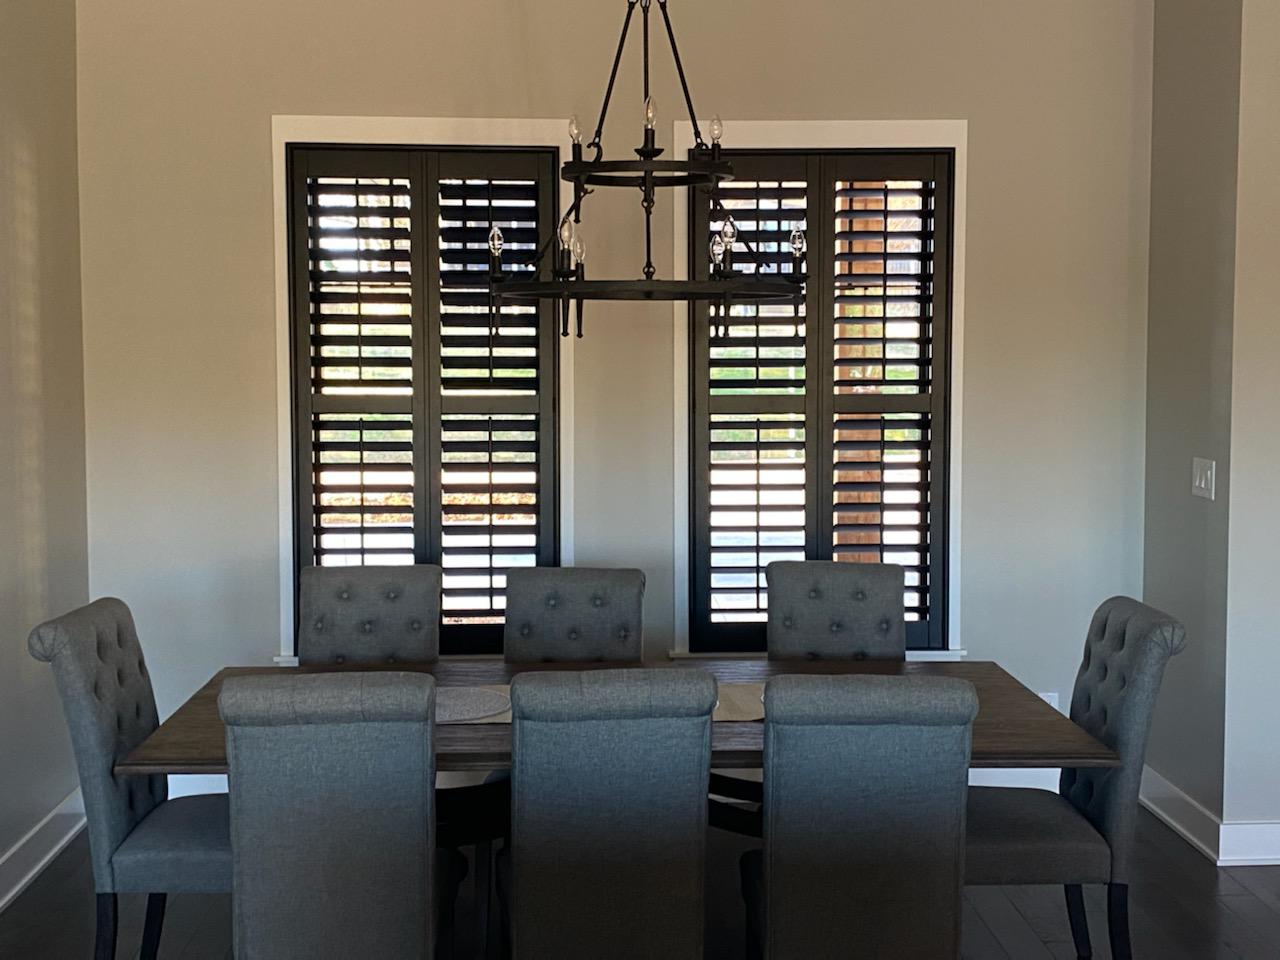 What’s the right way to make a statement in a minimalist space? Why not strike a contrast? That’s wh Budget Blinds of Knoxville & Maryville Knoxville (865)588-3377